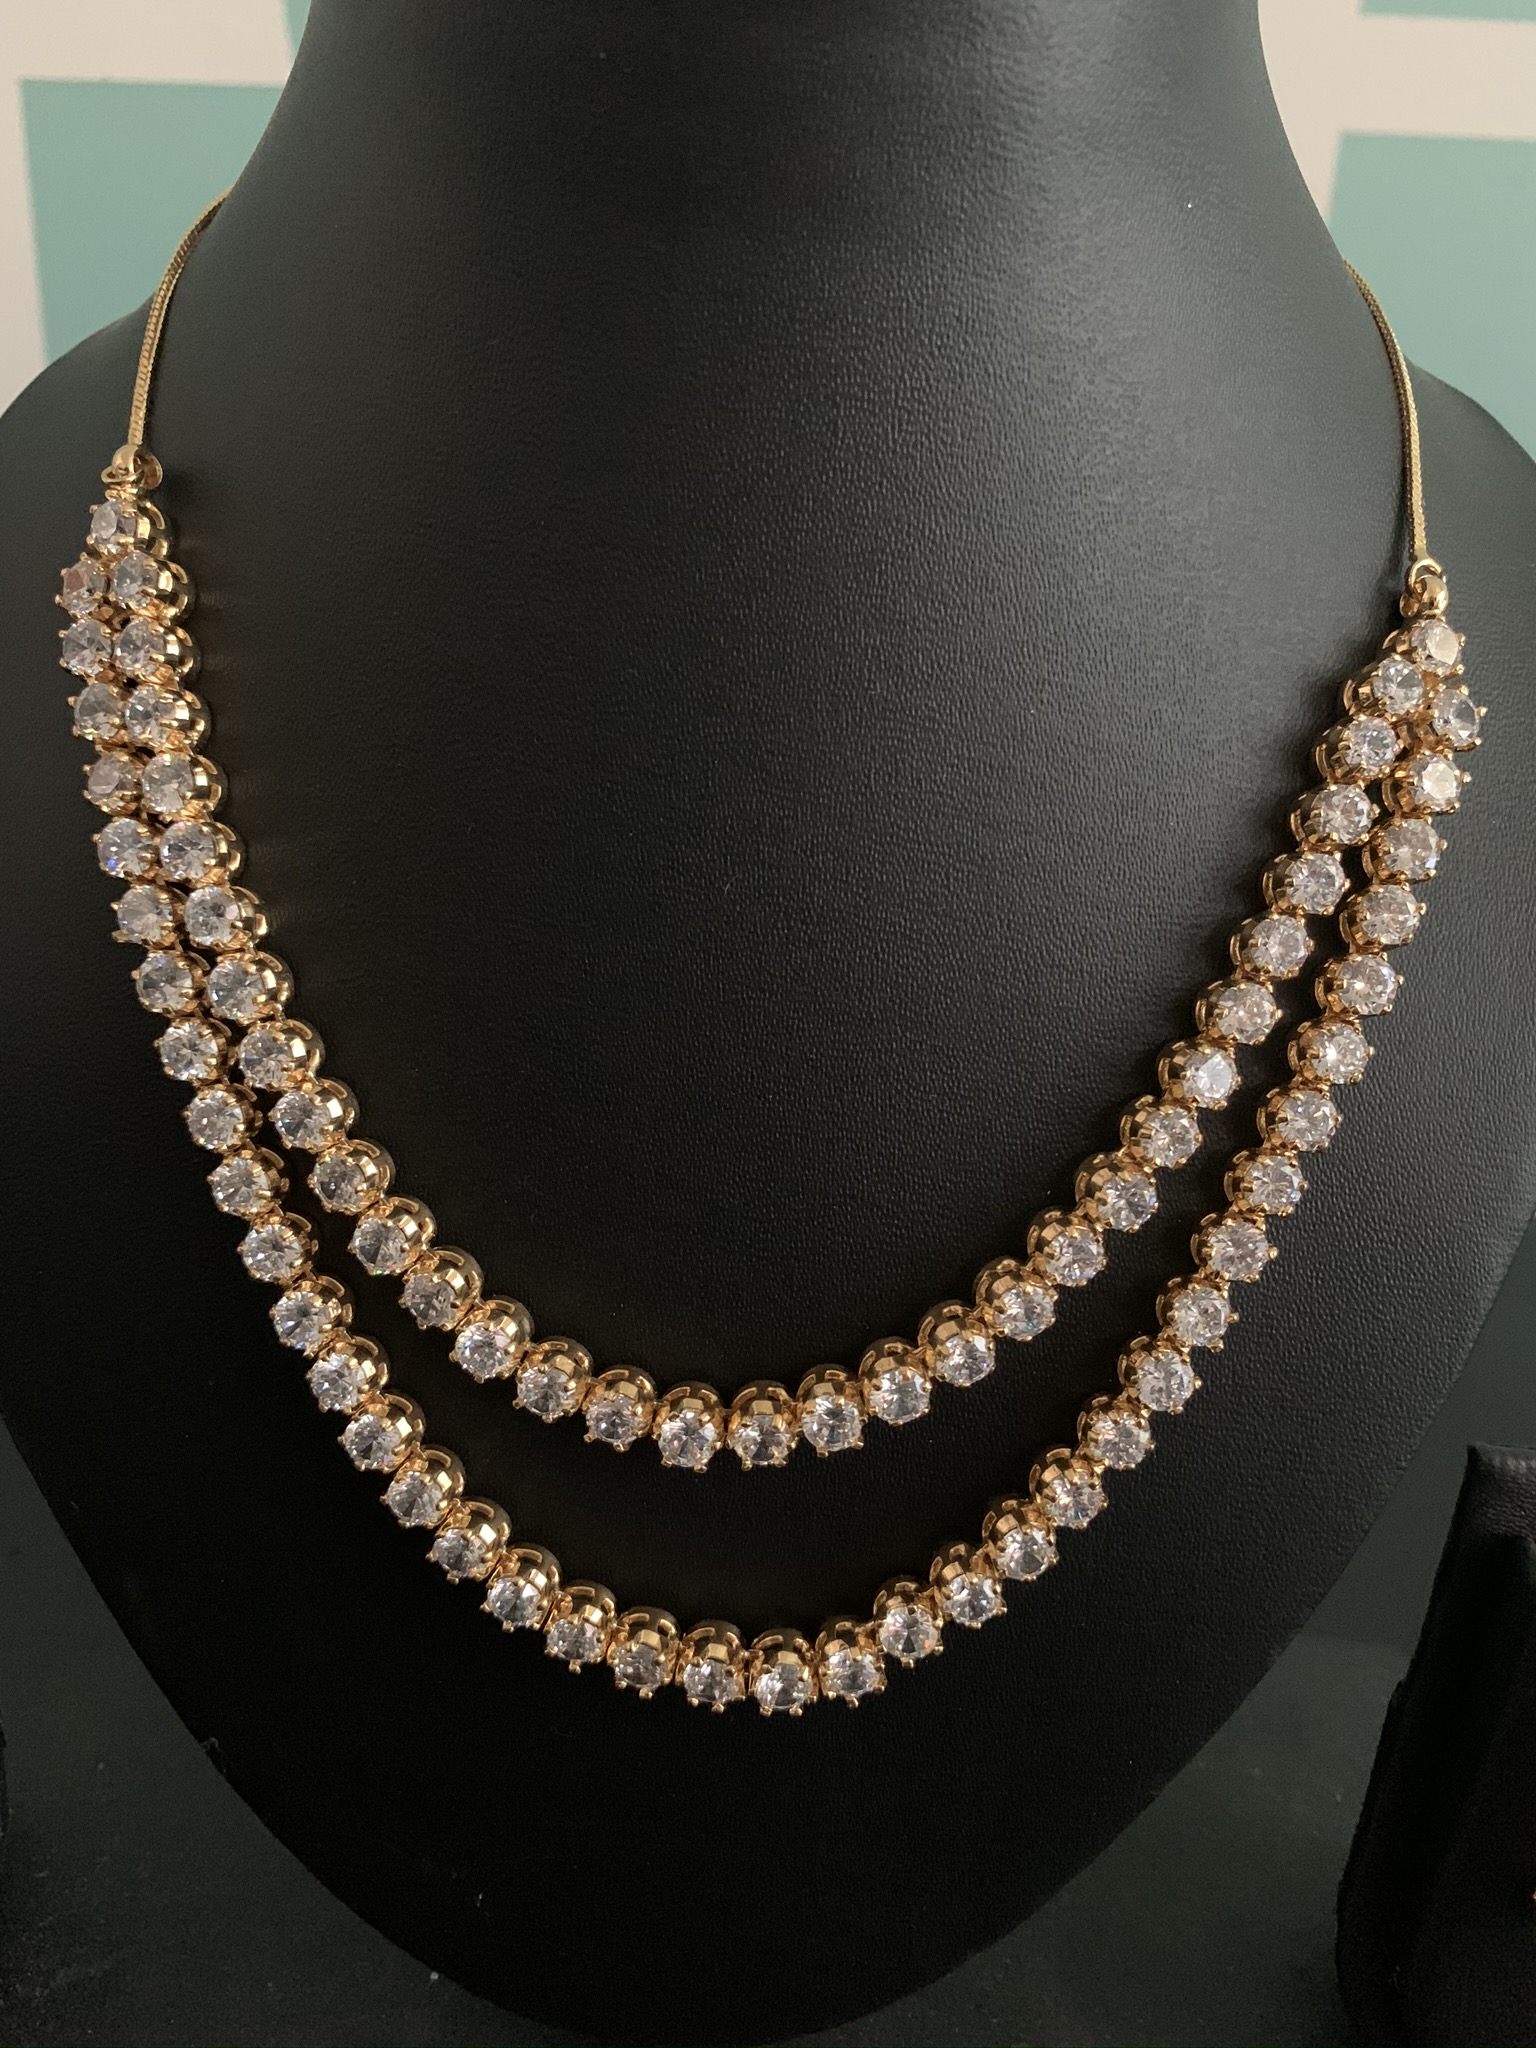 White Stone Necklace and Earring Set #41492 | Buy Online @ DesiClik.com ...